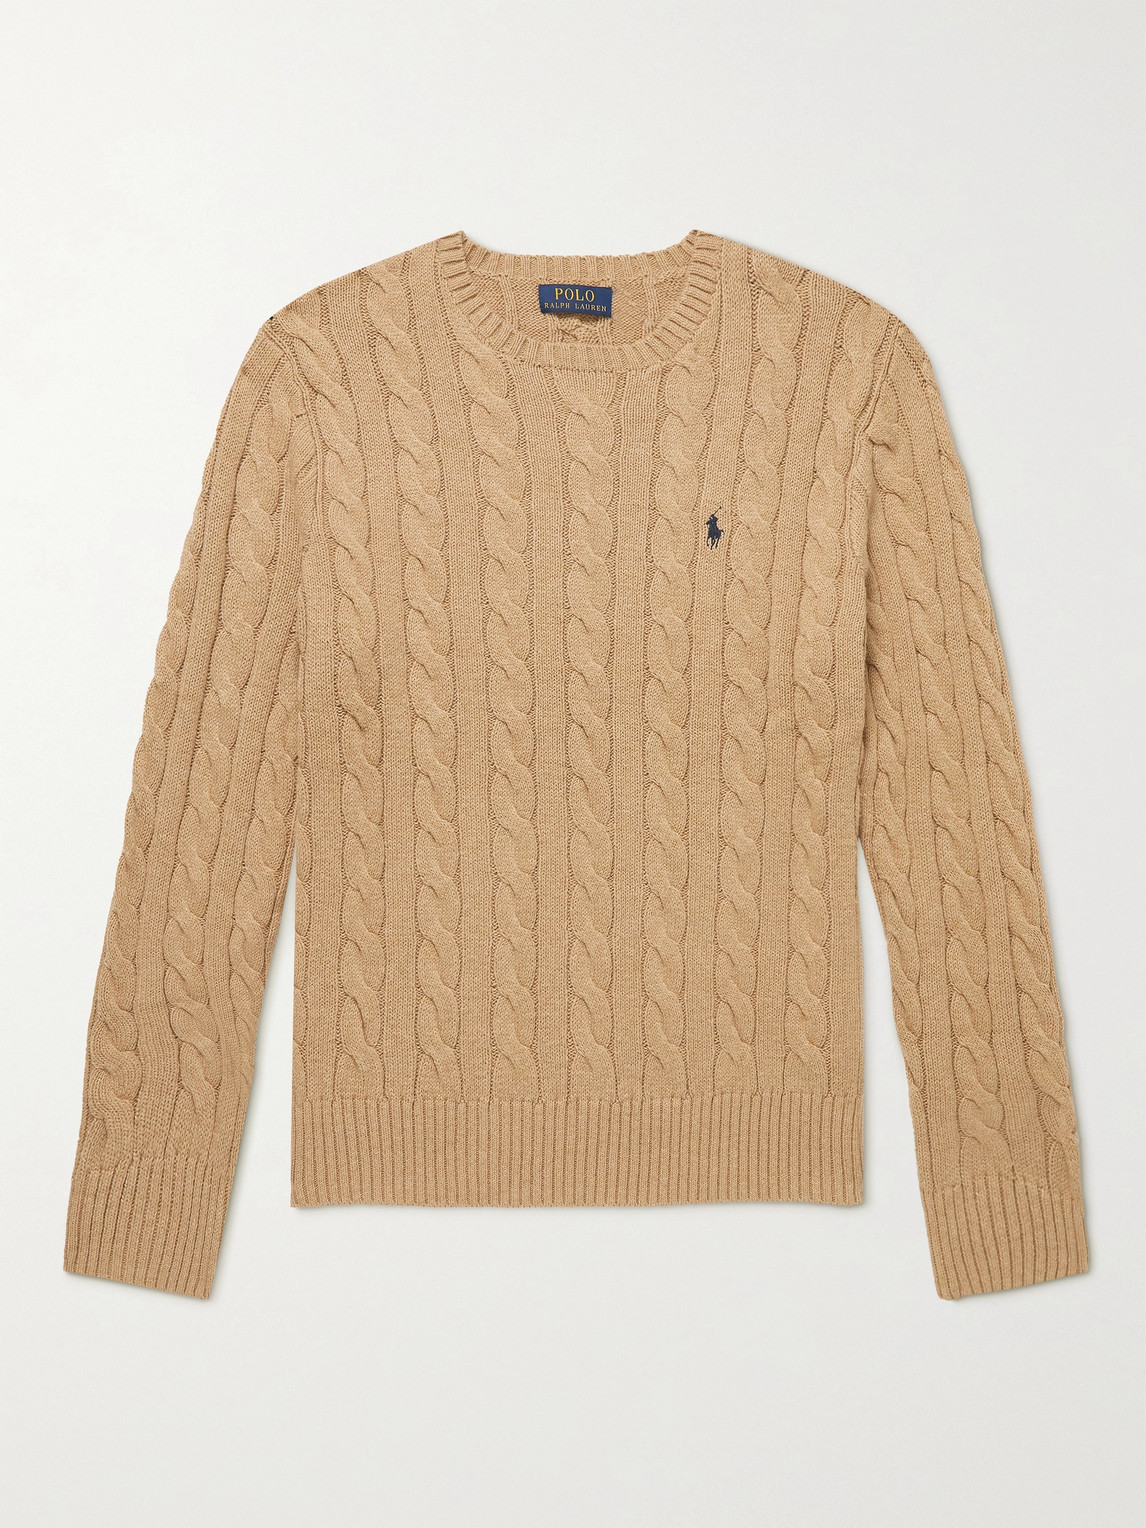 POLO RALPH LAUREN LOGO-EMBROIDERED CABLE-KNIT COTTON SWEATER